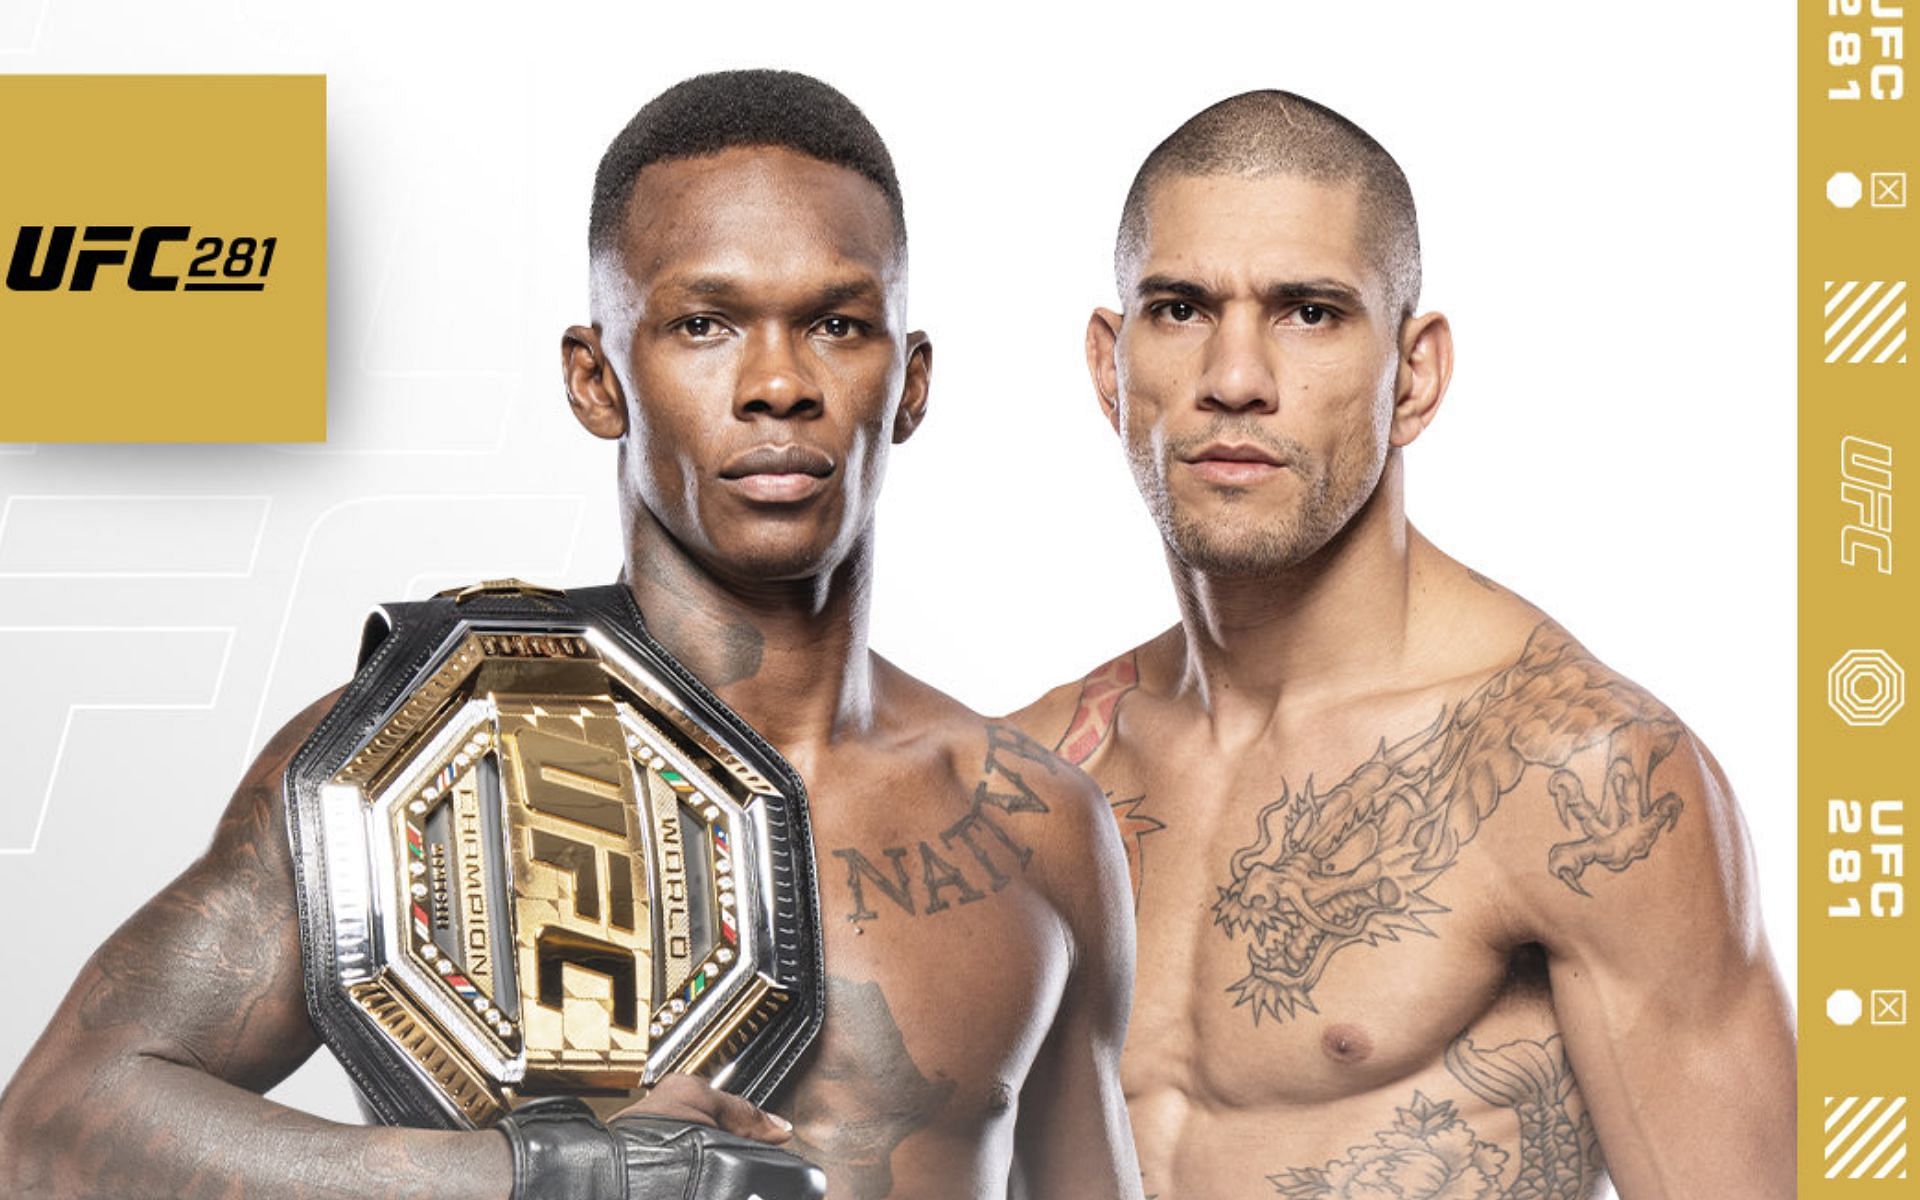 UFC 281 fight card What are the latest bouts added to the New York card?